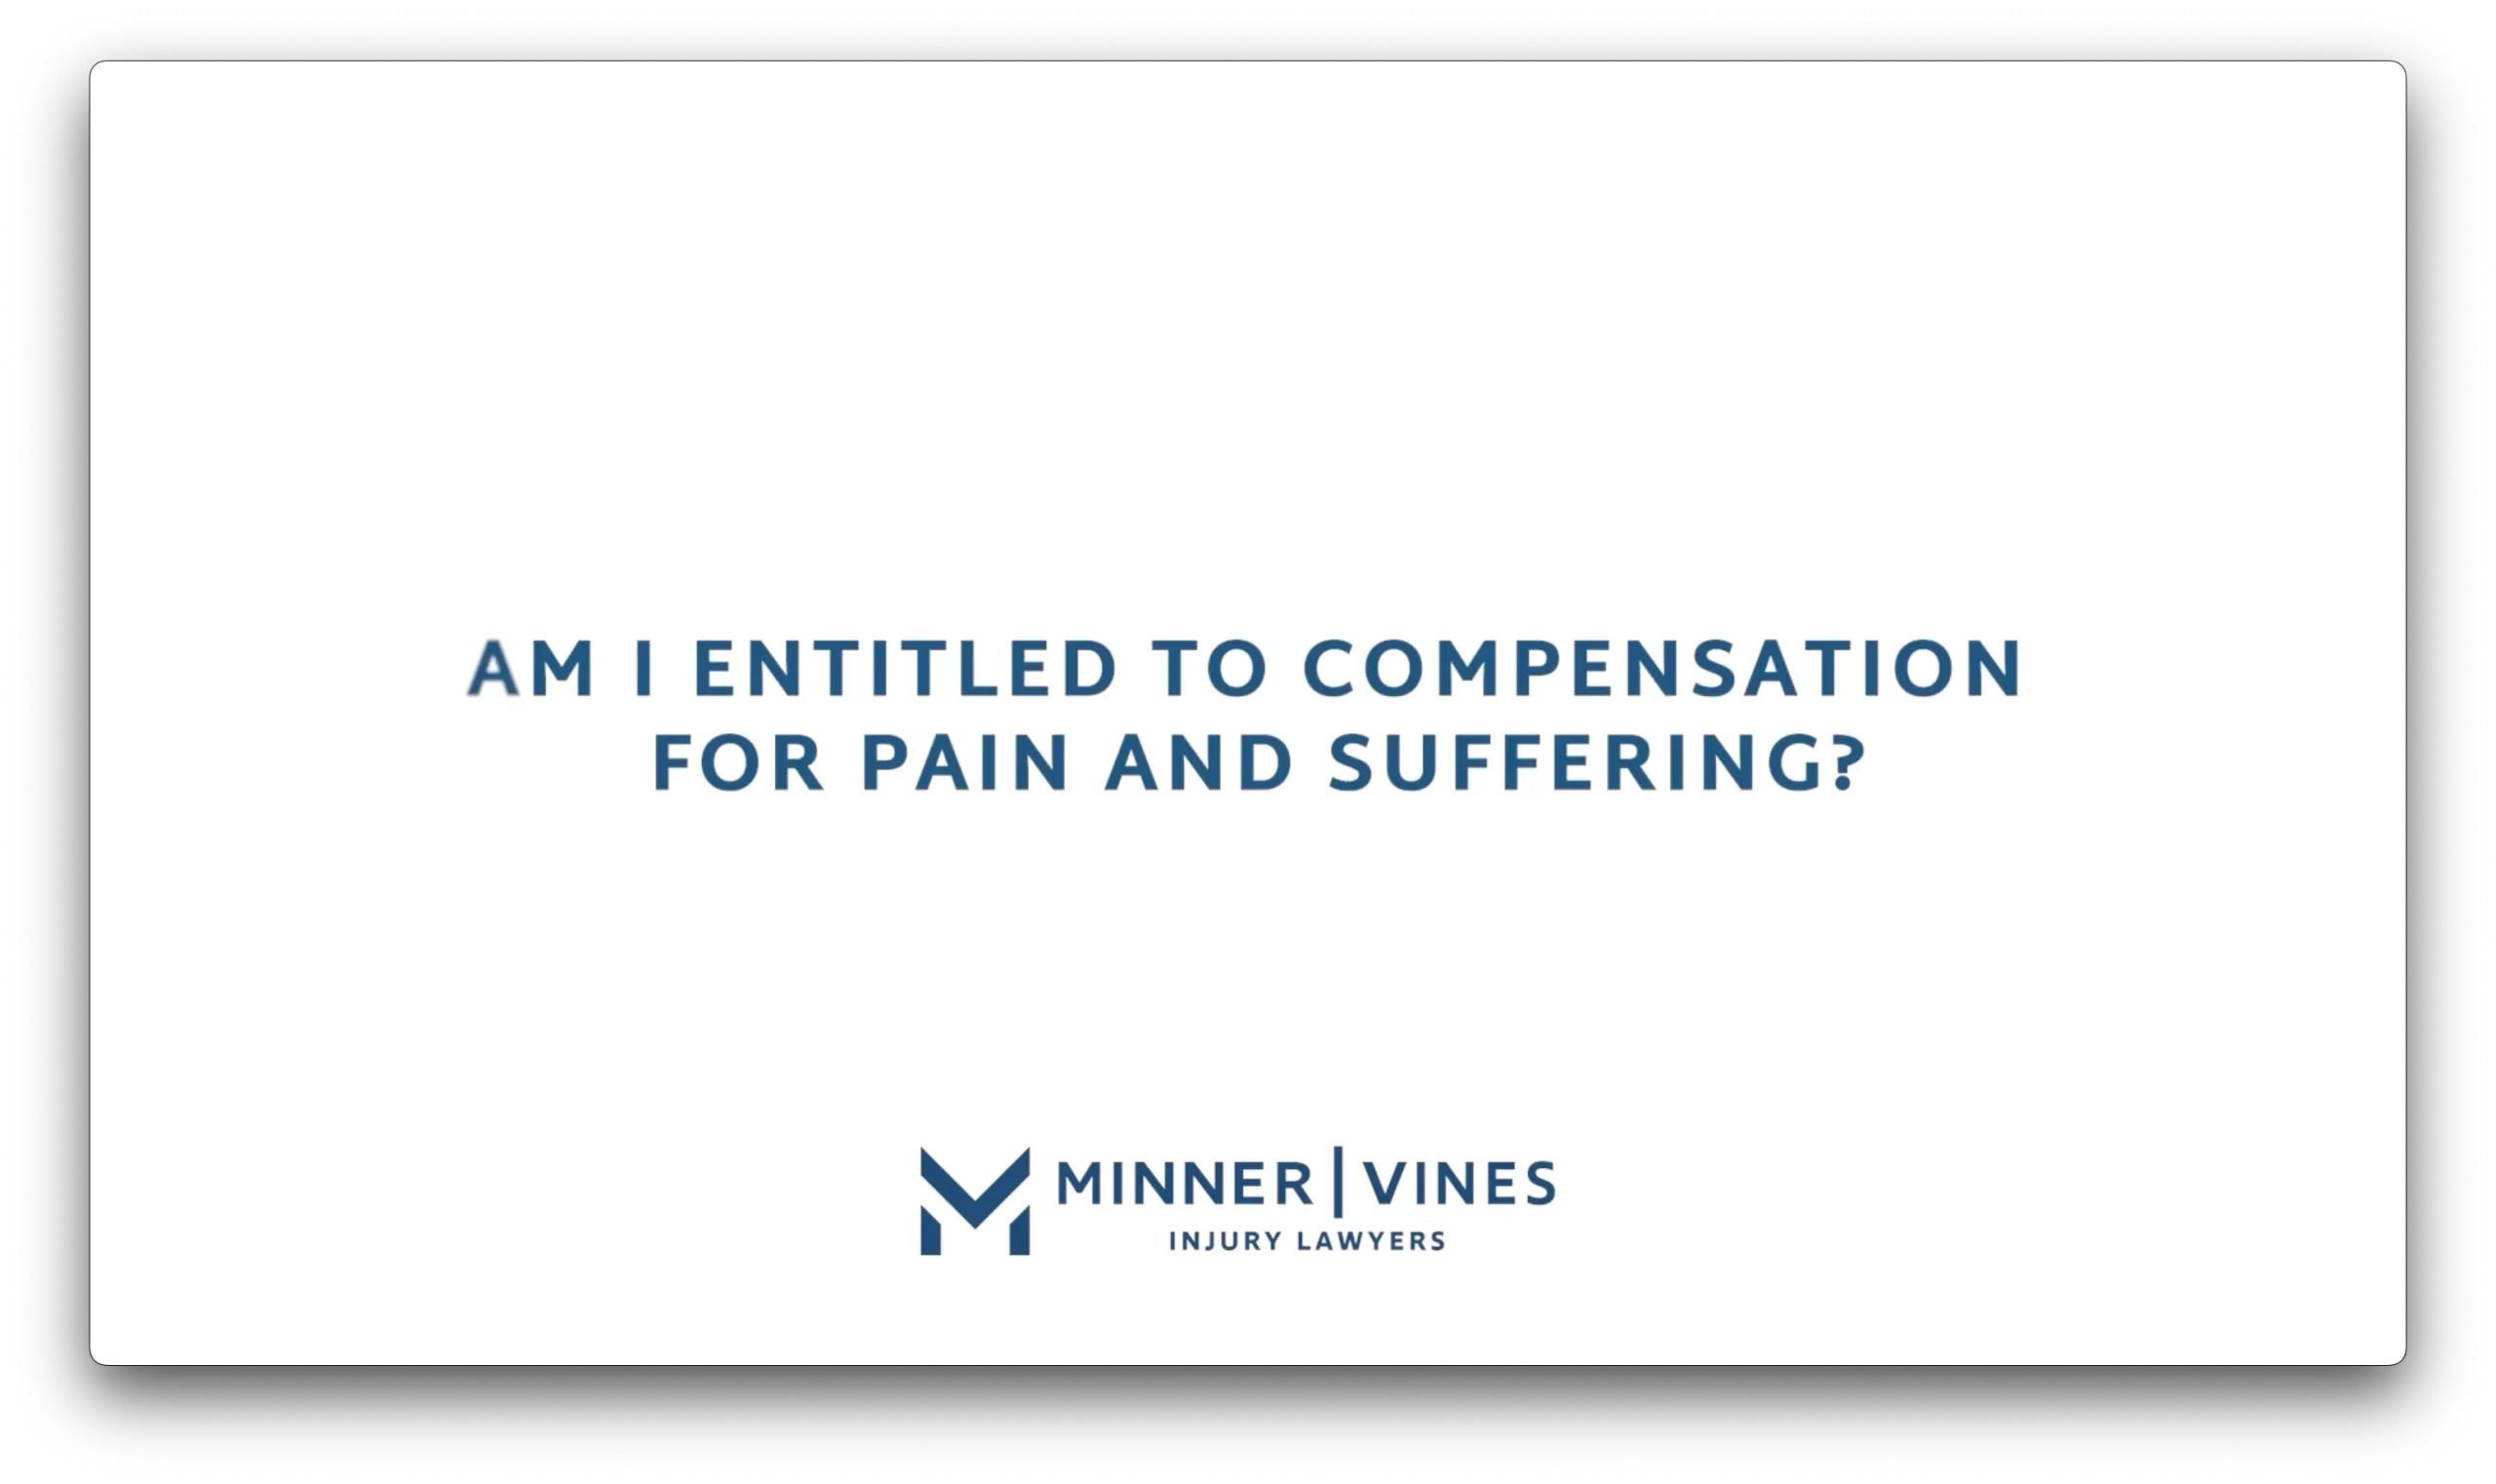 Am I entitled to compensation for pain and suffering?